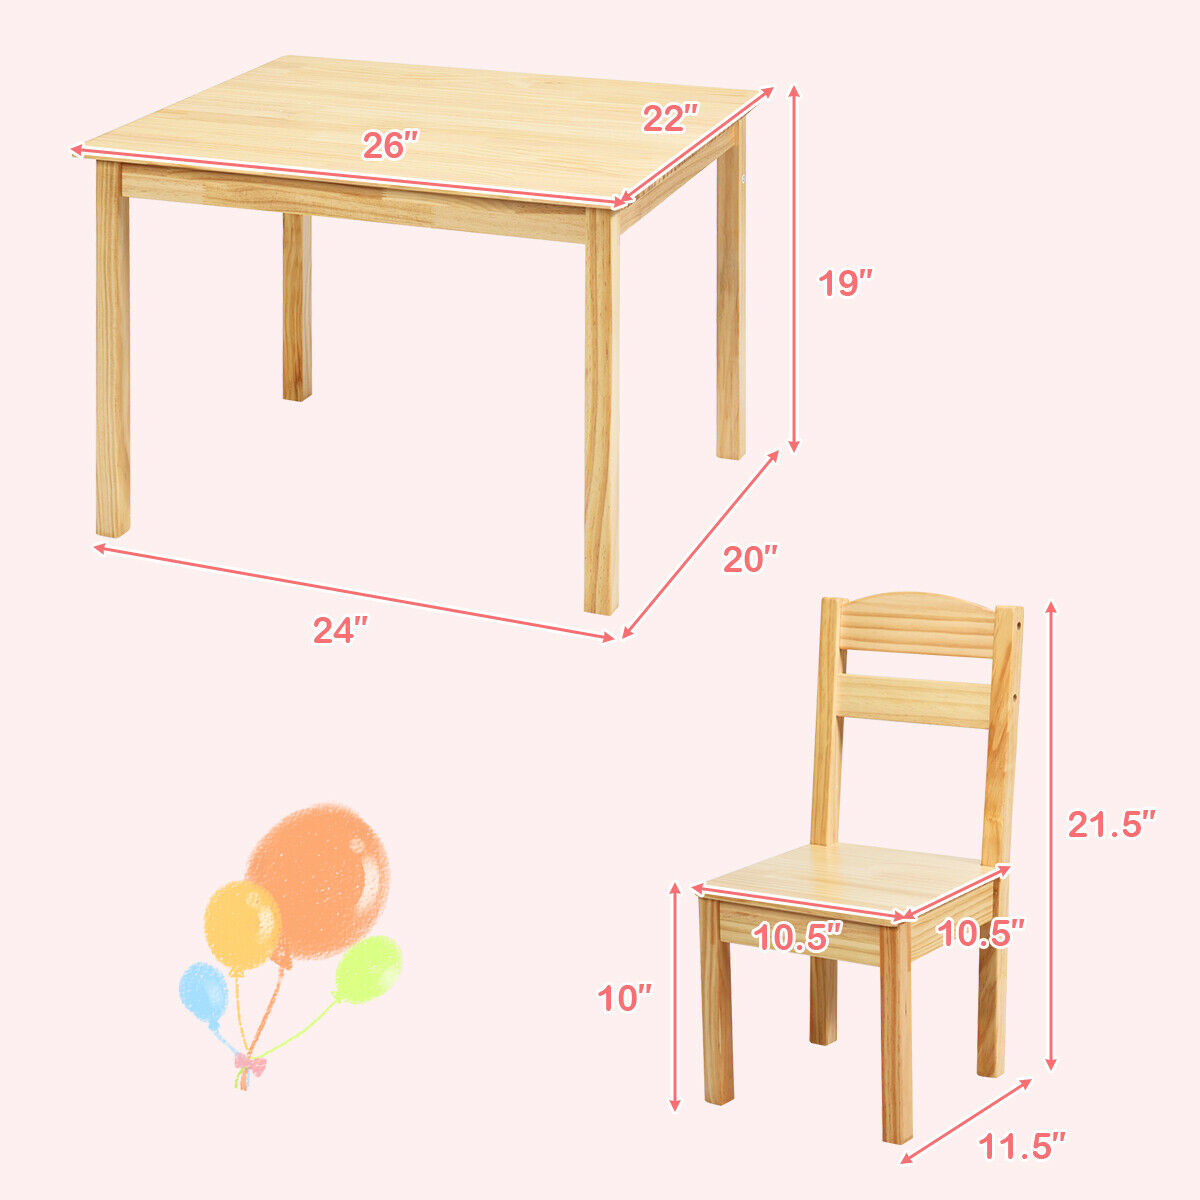 children's play table chair set